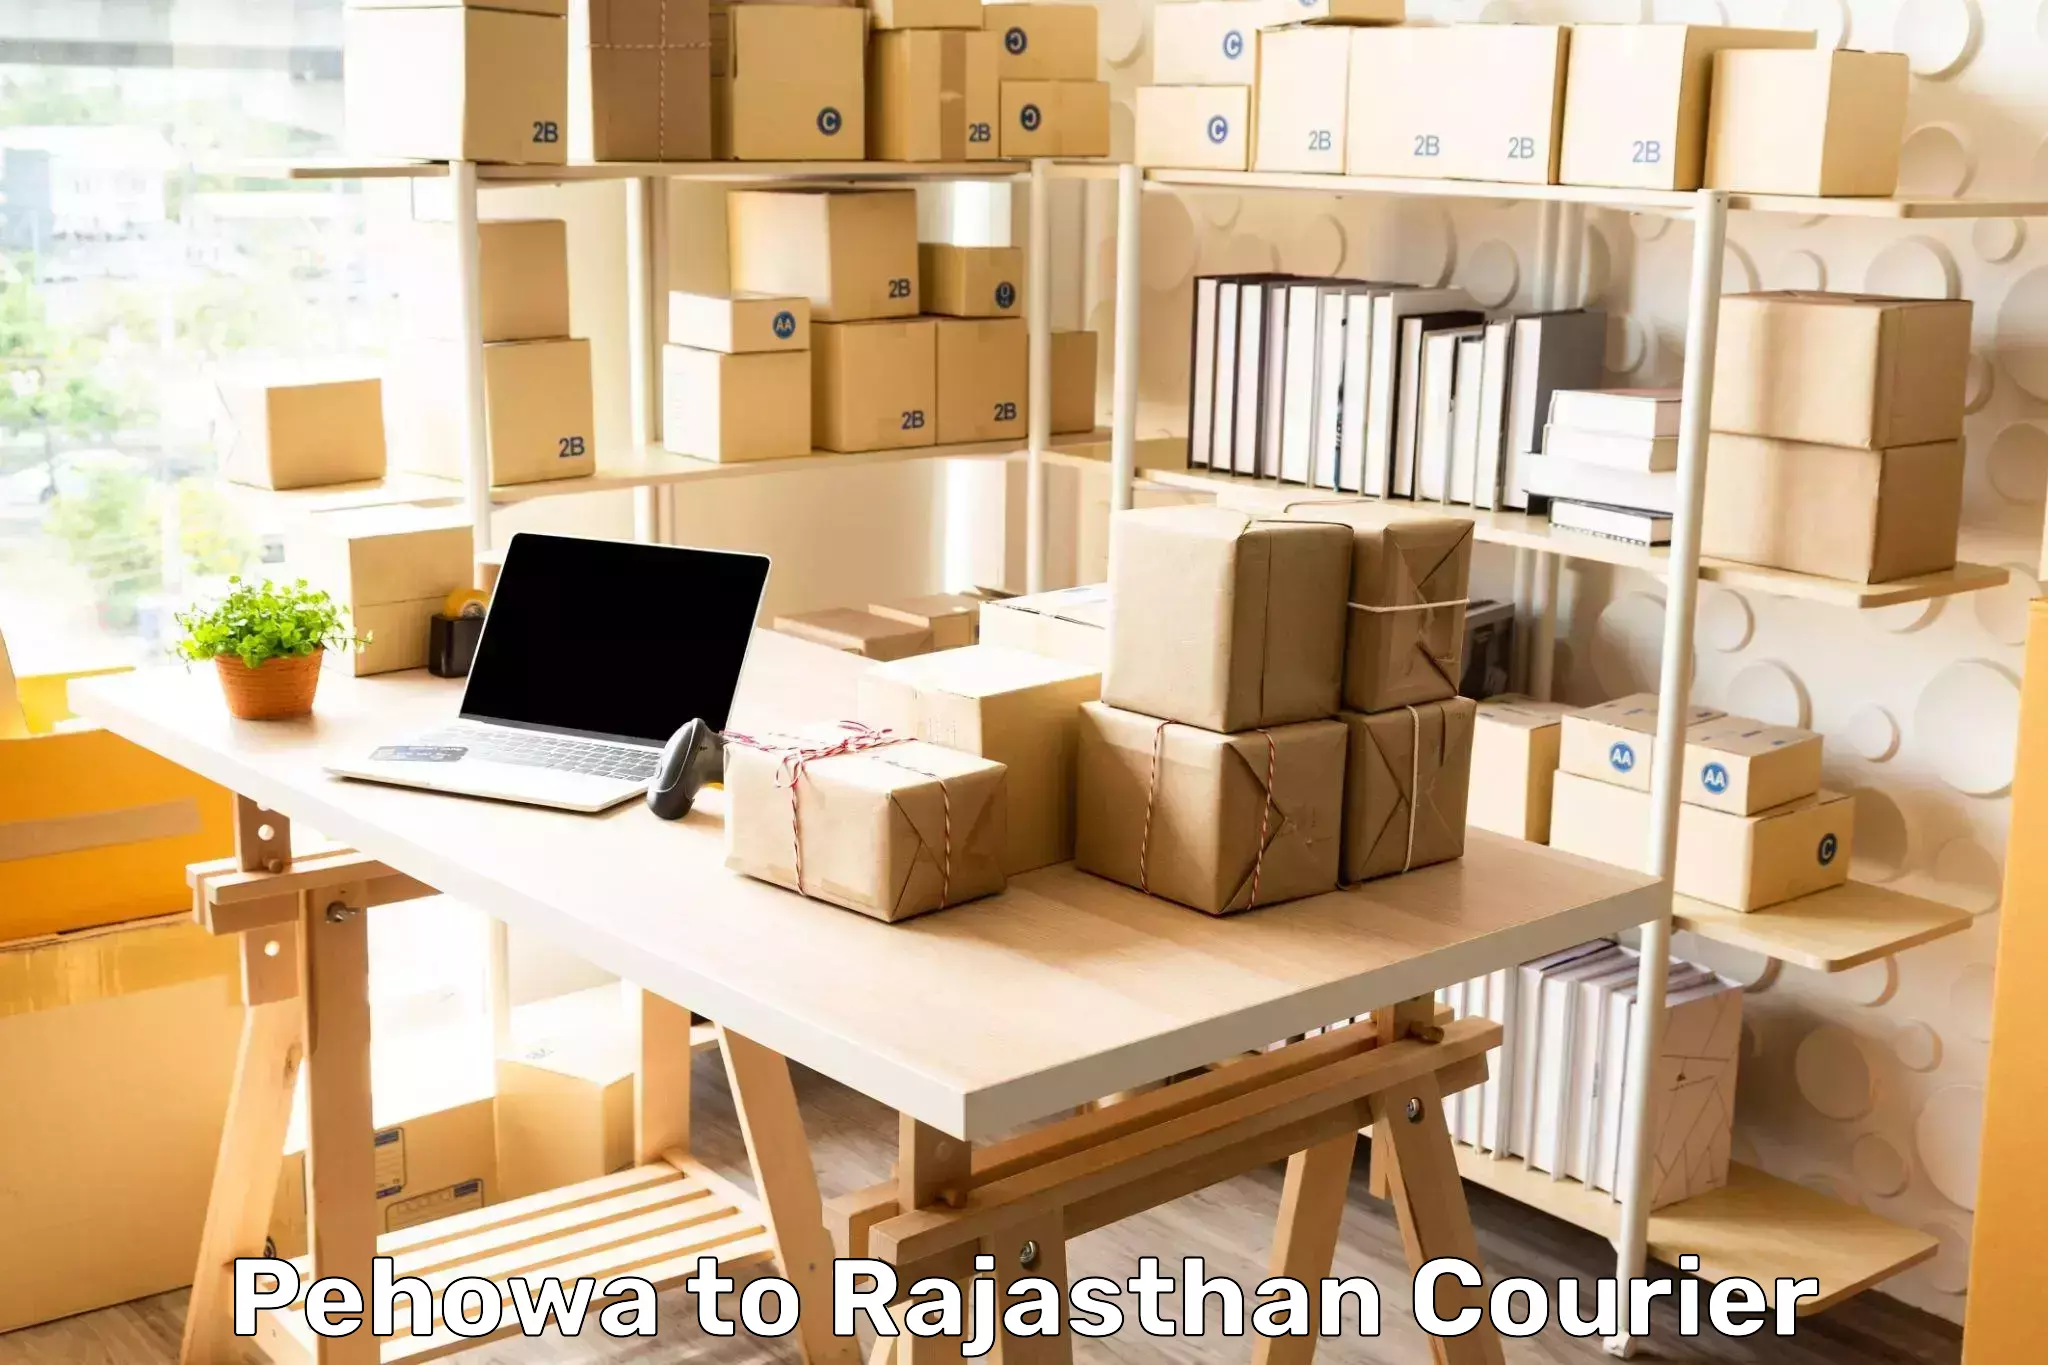 Express package services in Pehowa to Rajasthan